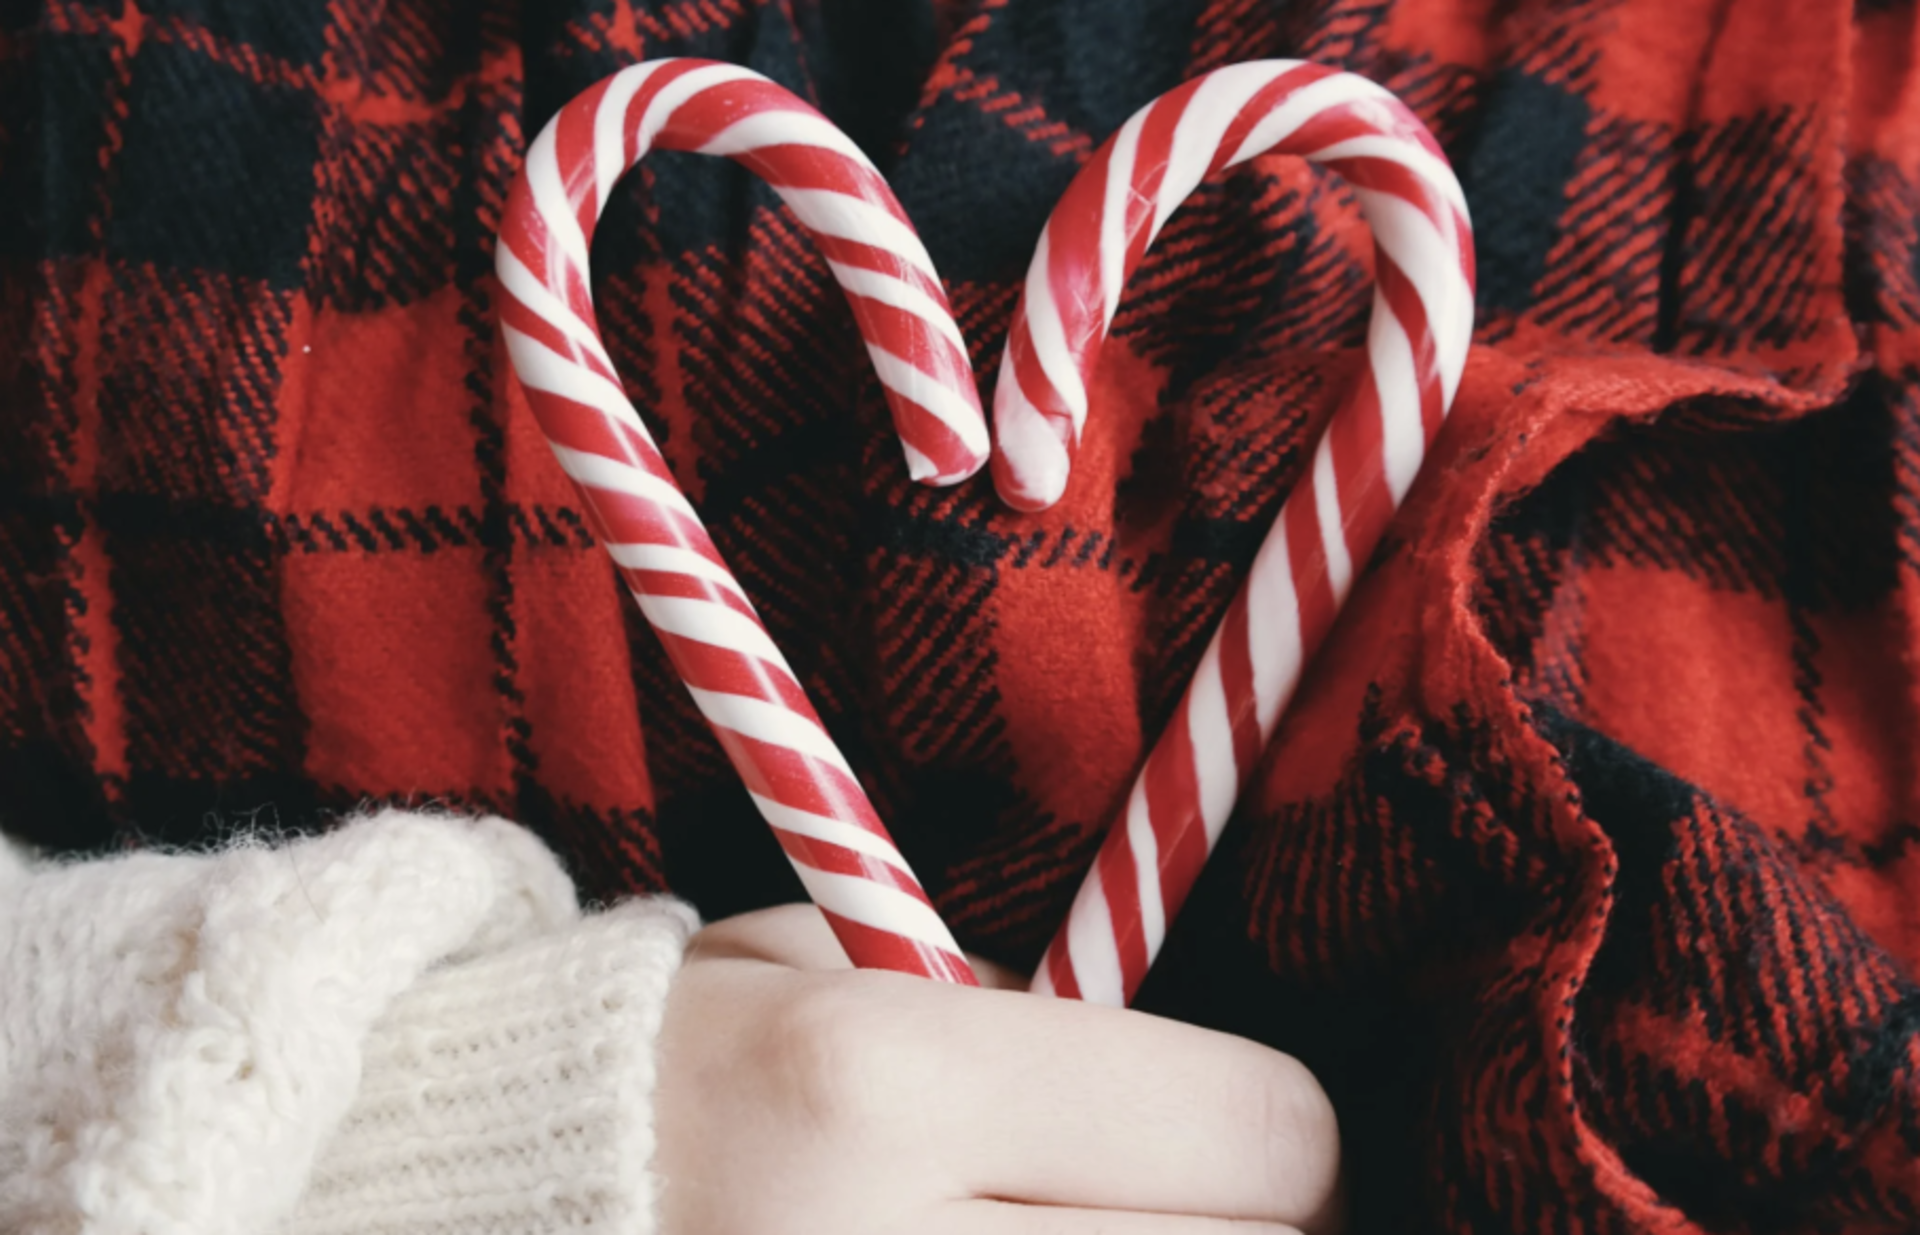 The history of candy canes and why they taste so cool